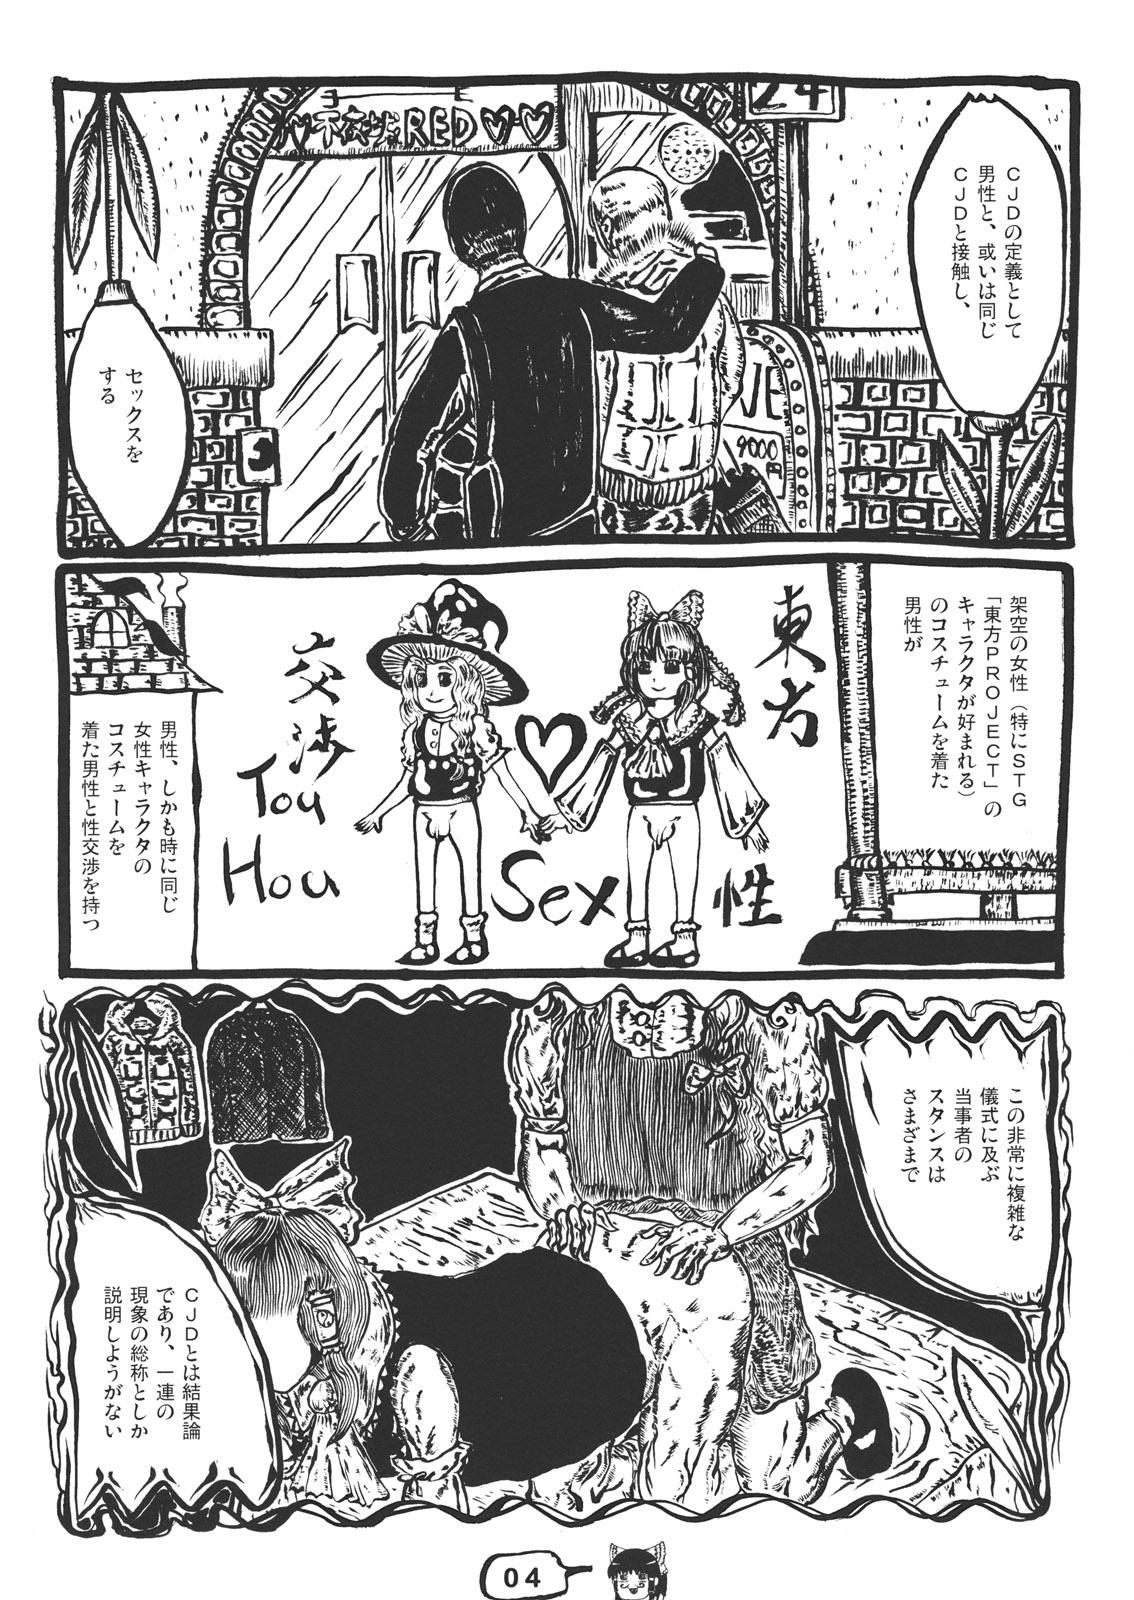 Gay Shorthair CJDG2 - Touhou project Hermana - Page 4